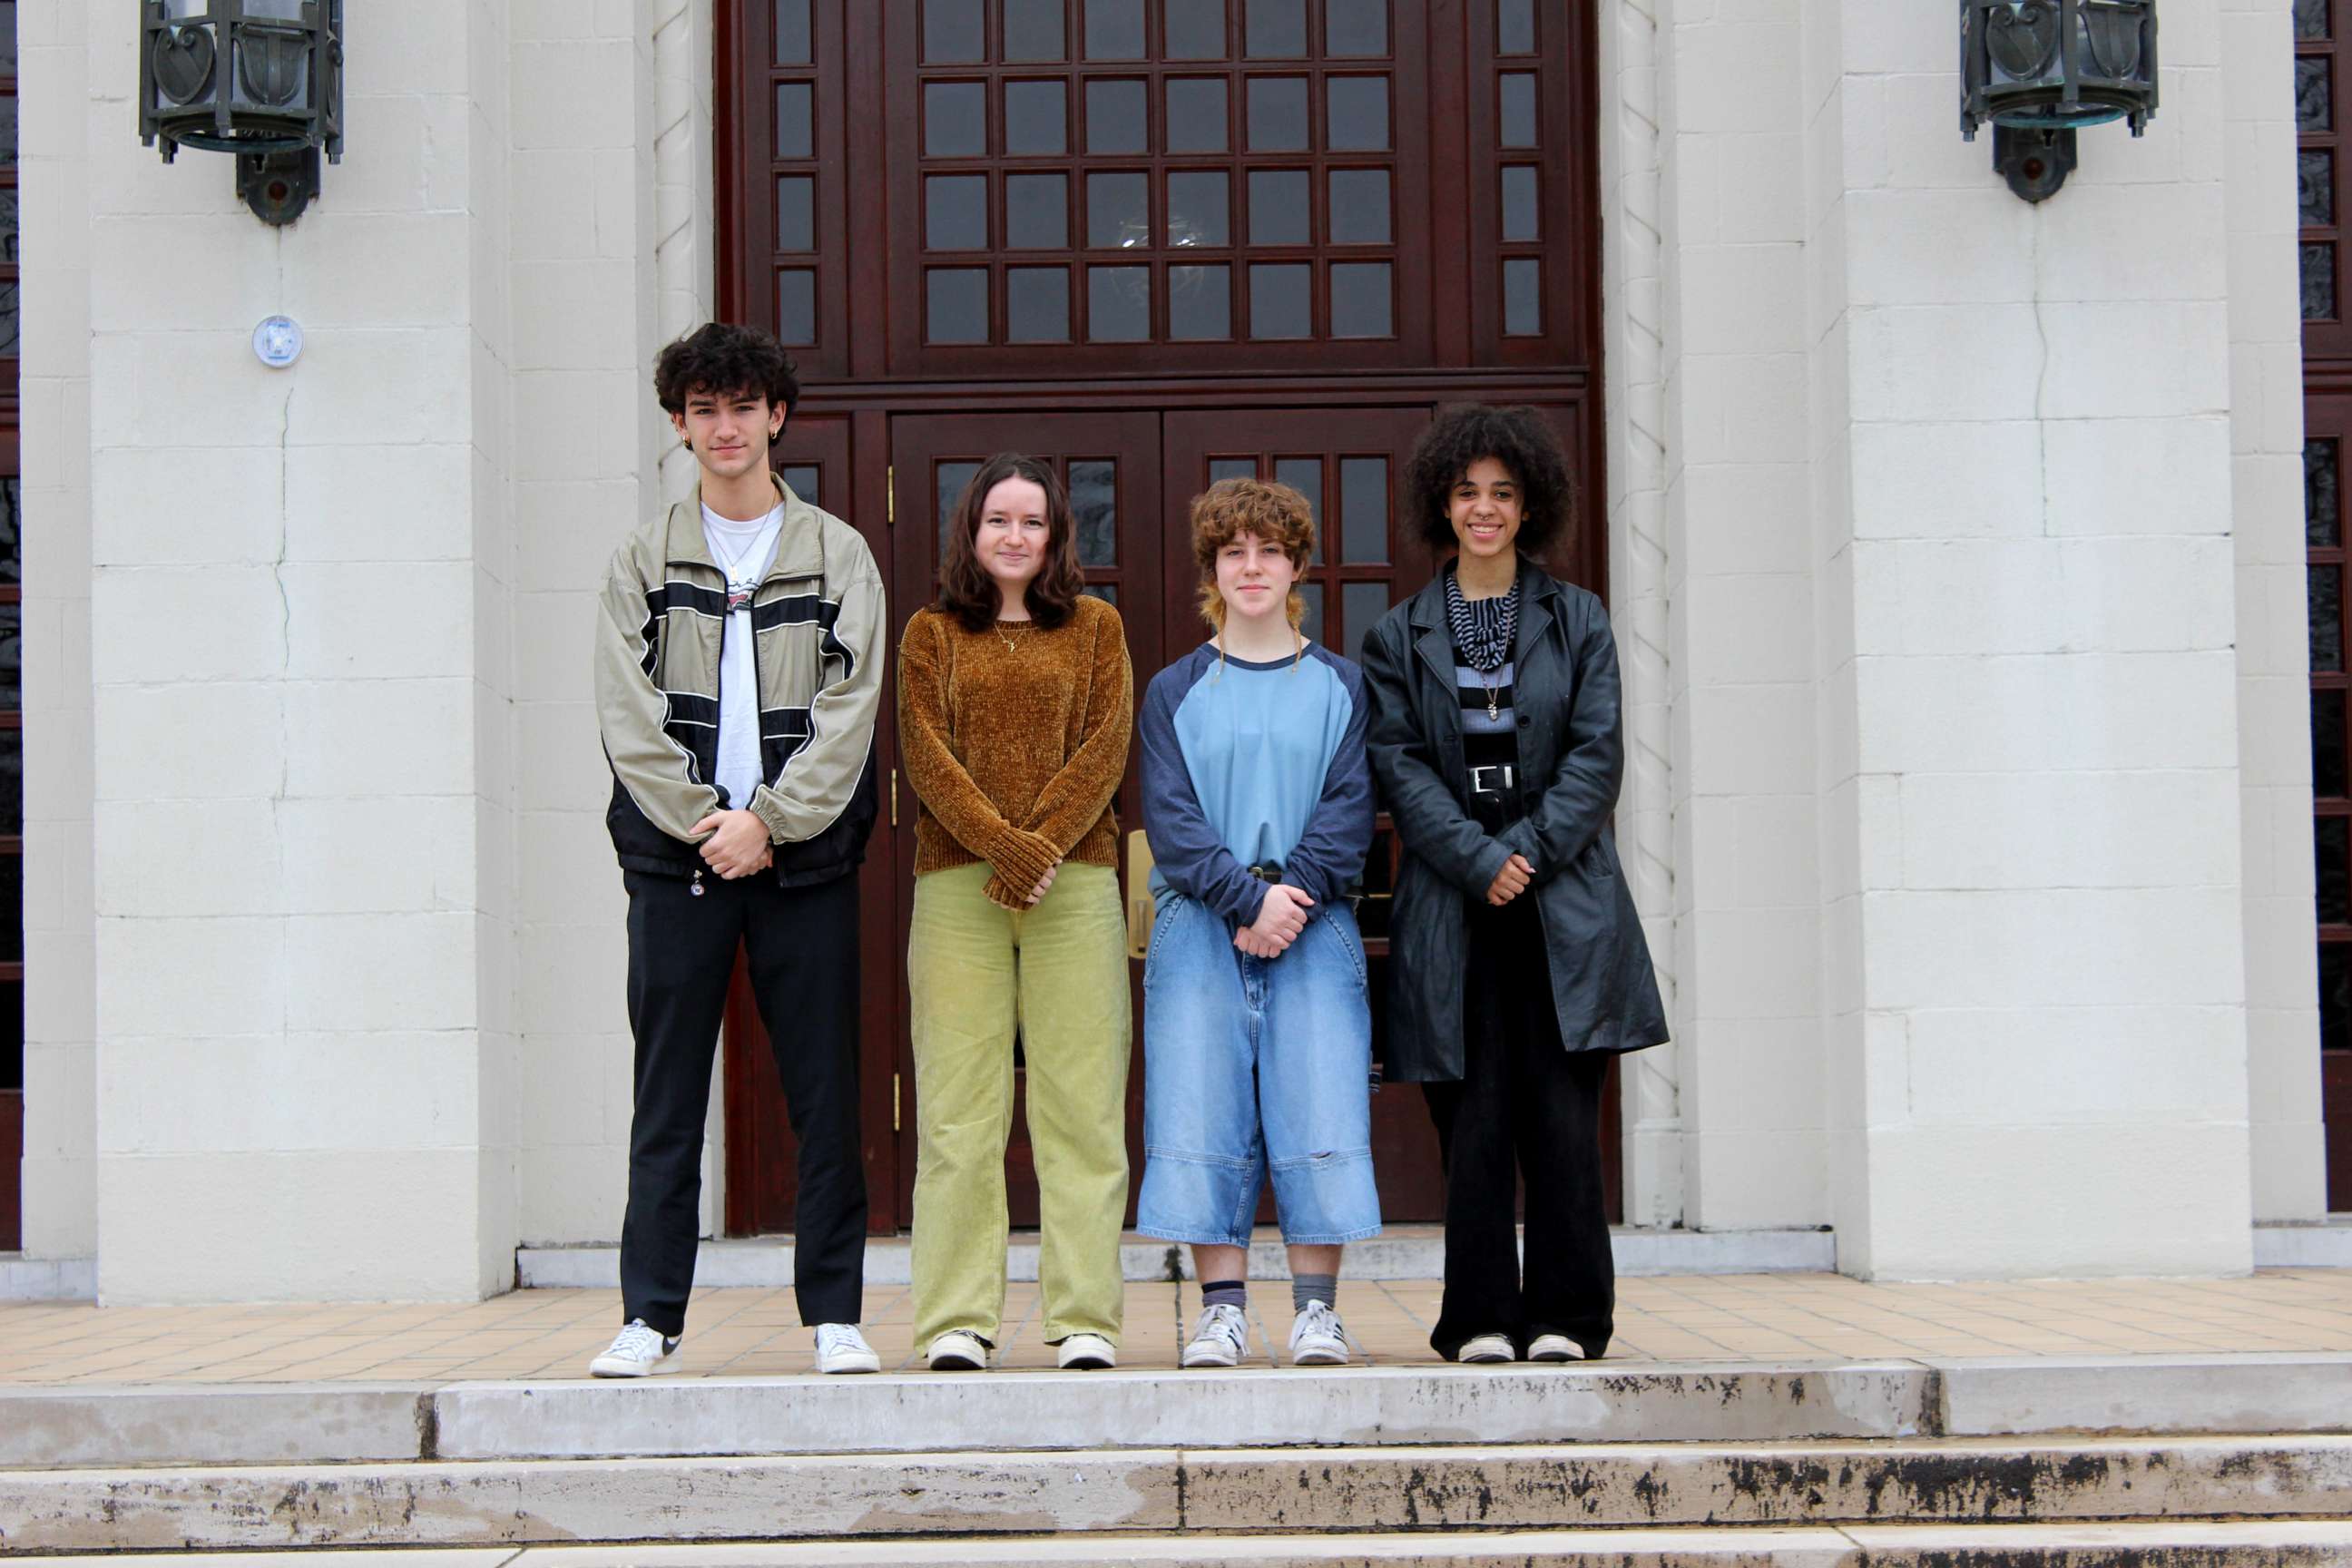 PHOTO: Students Ernest Quirk, Gryffyn May, Bekah Jackson and Addison McCuien at Little Rock Central High School on Thursday, March 2, 2023.